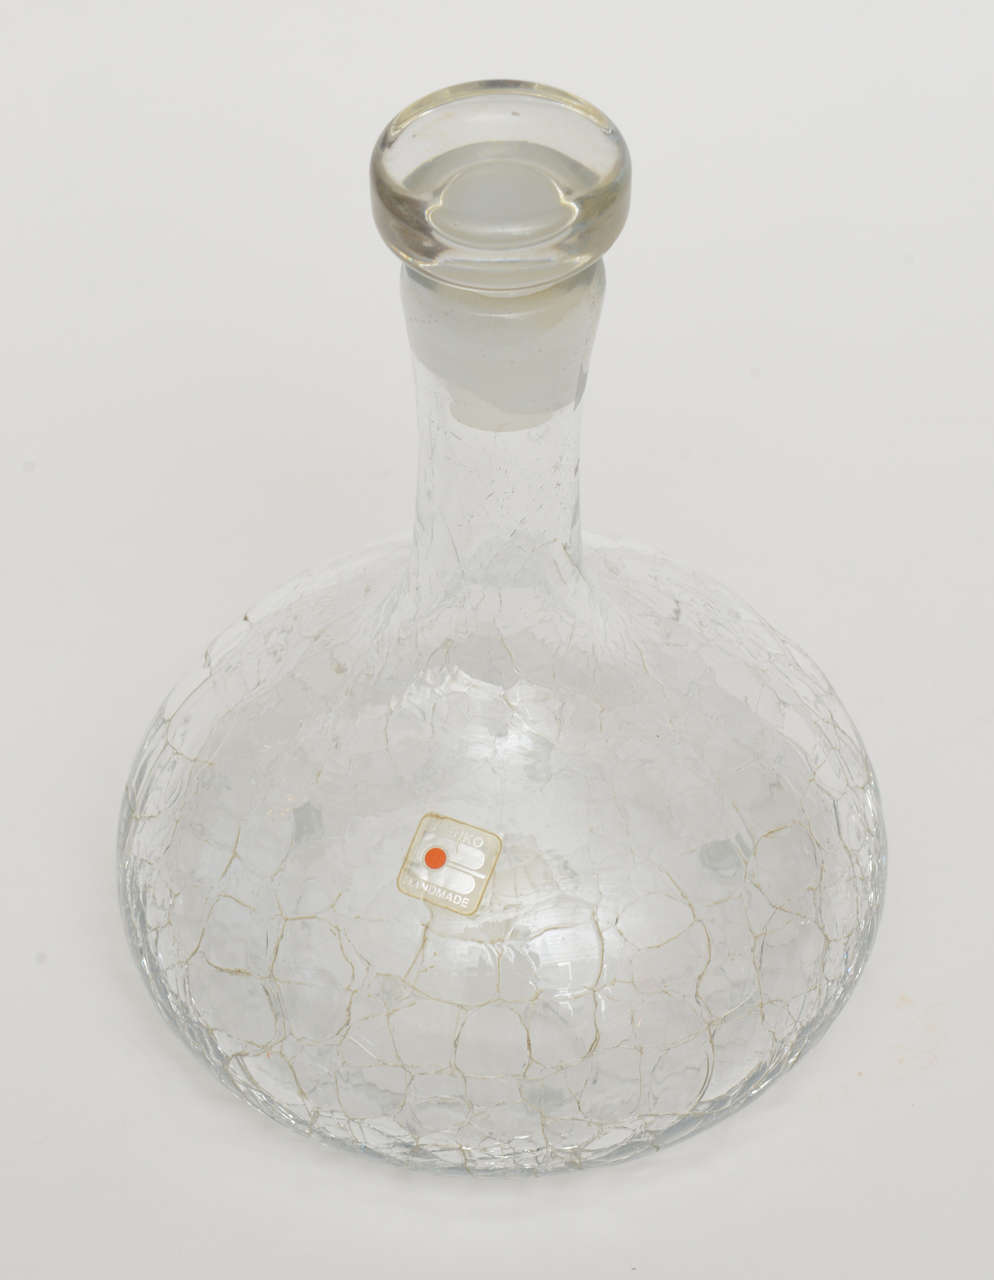 The crackled glass of this vintage Blenko decanter with it's original glass stopper has the original and vintage plastic label on the glass. The bulbous form and shape is wonderful with the crackled glass effect. It is very modernist and timeless!